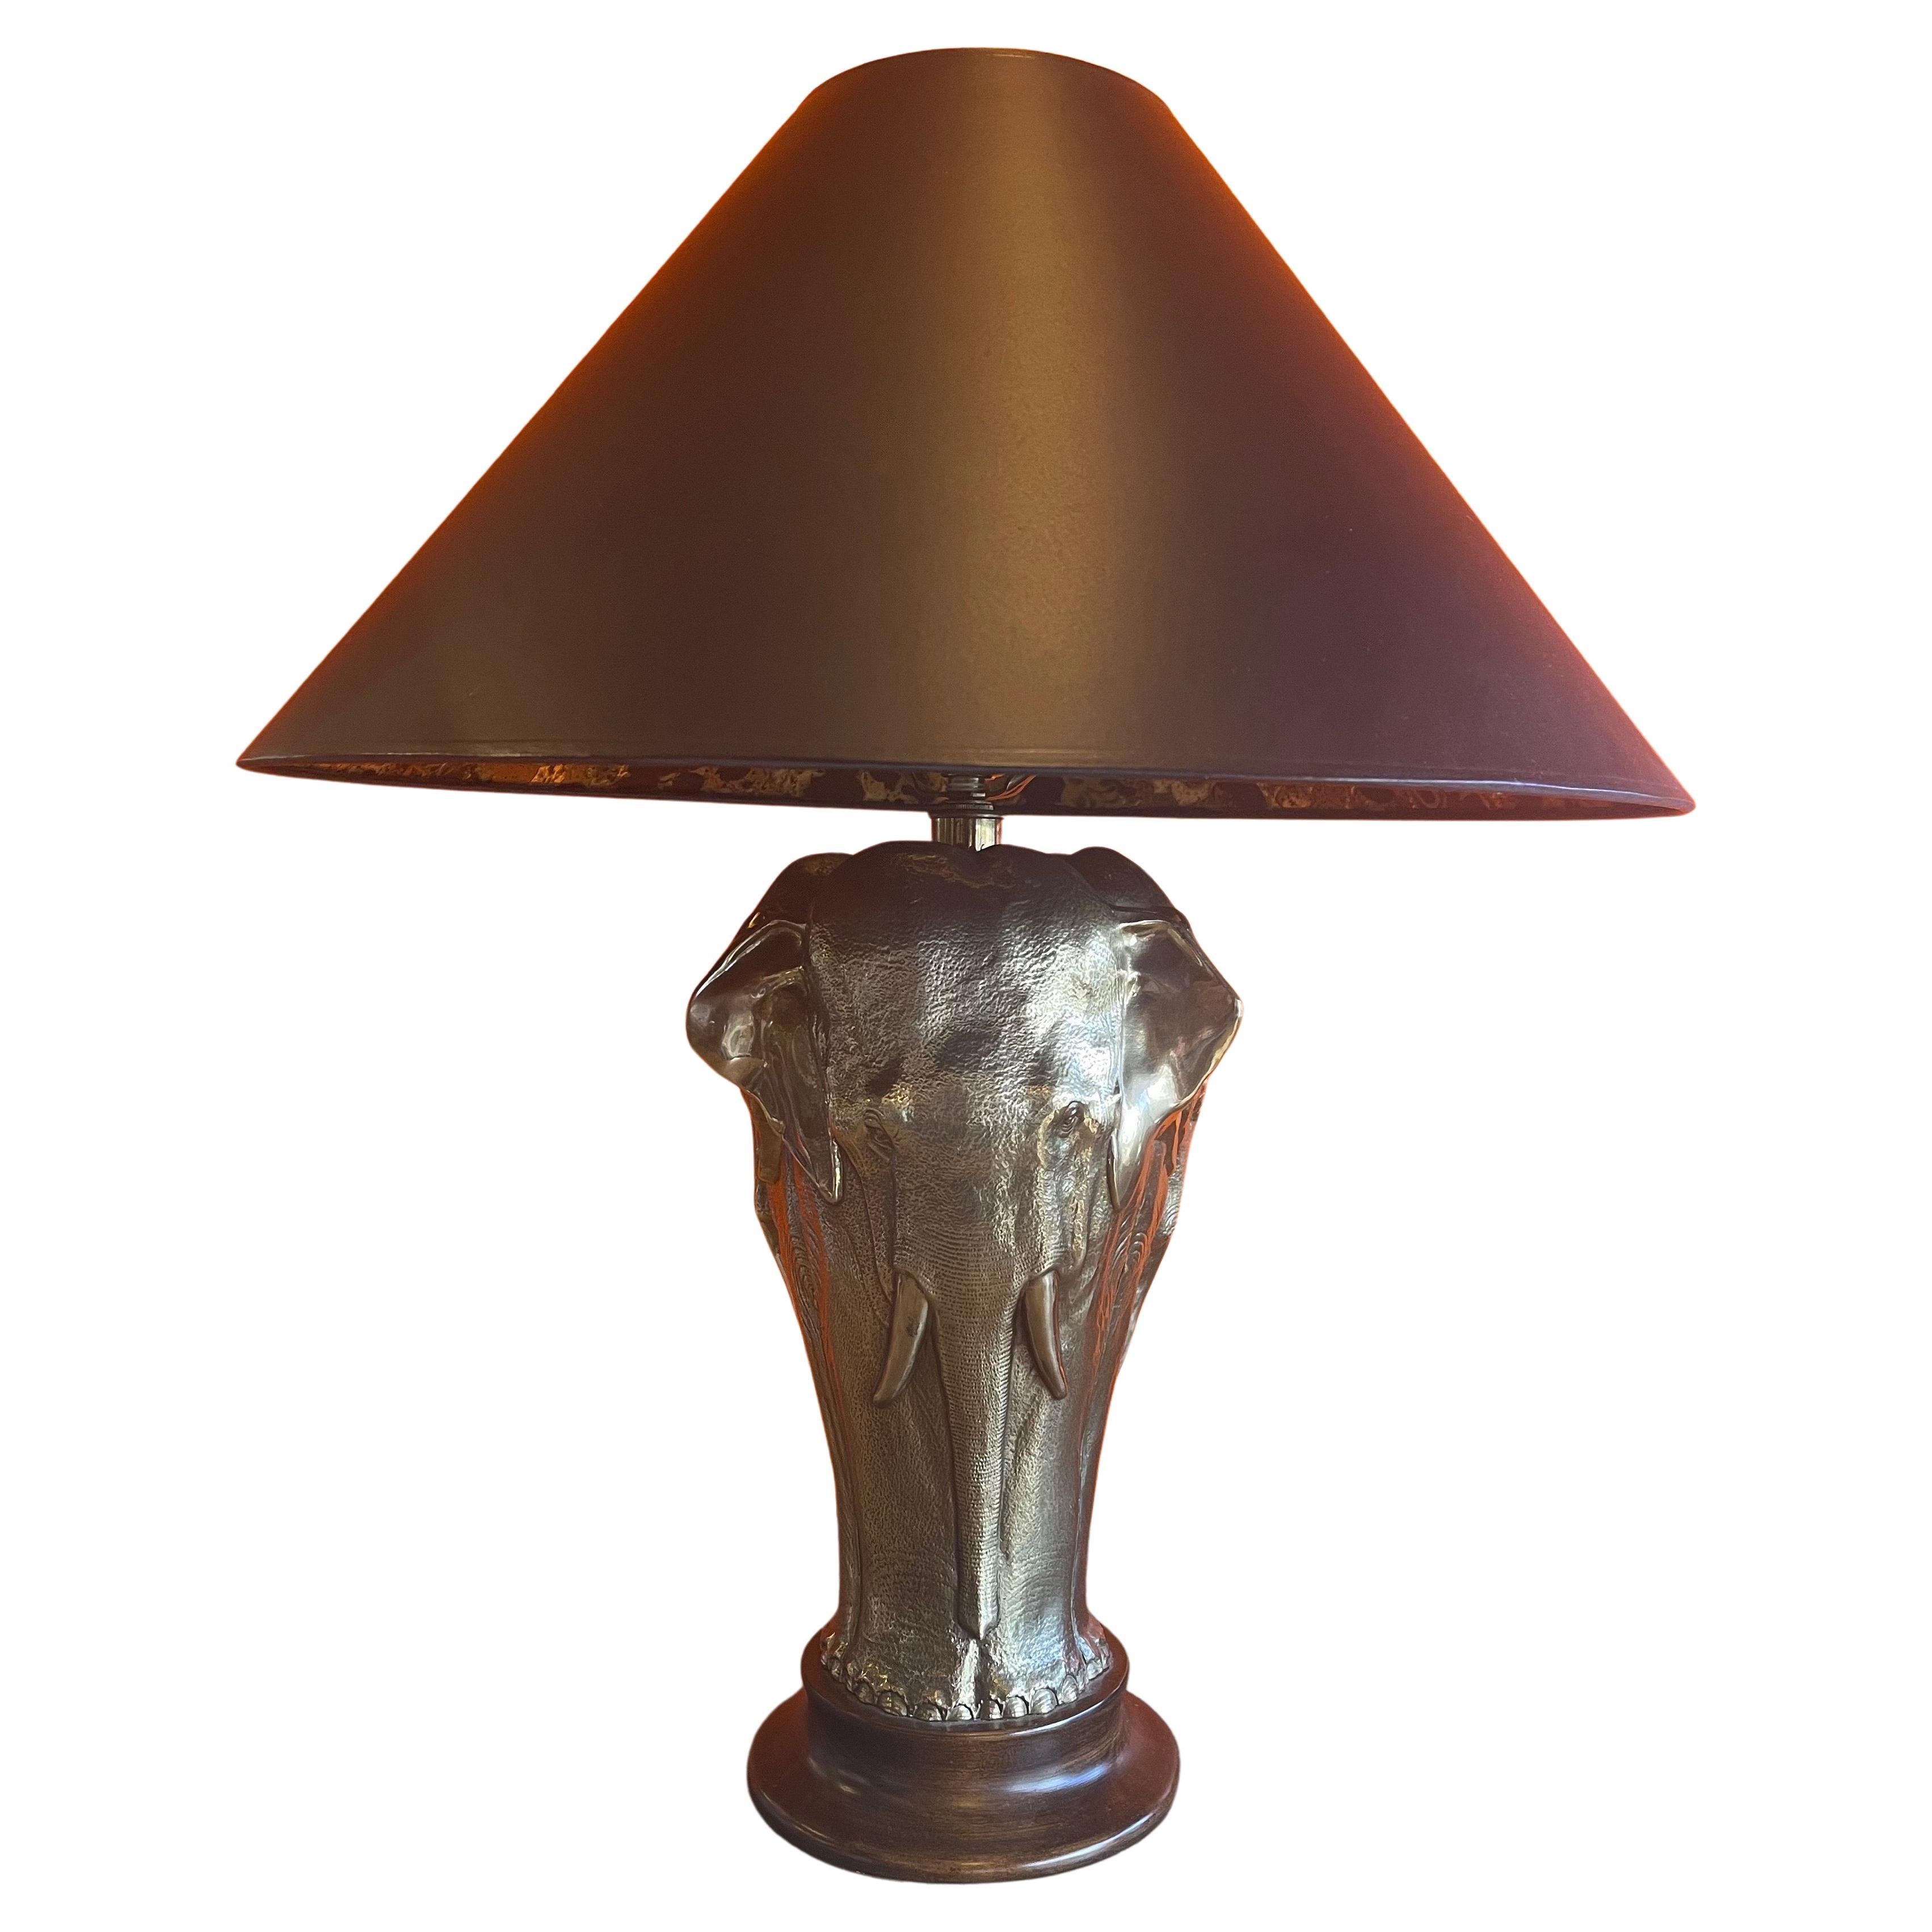 Sculptural Brass Elephant Table Lamp by Tyndale for Frederick Cooper Lamp Co.